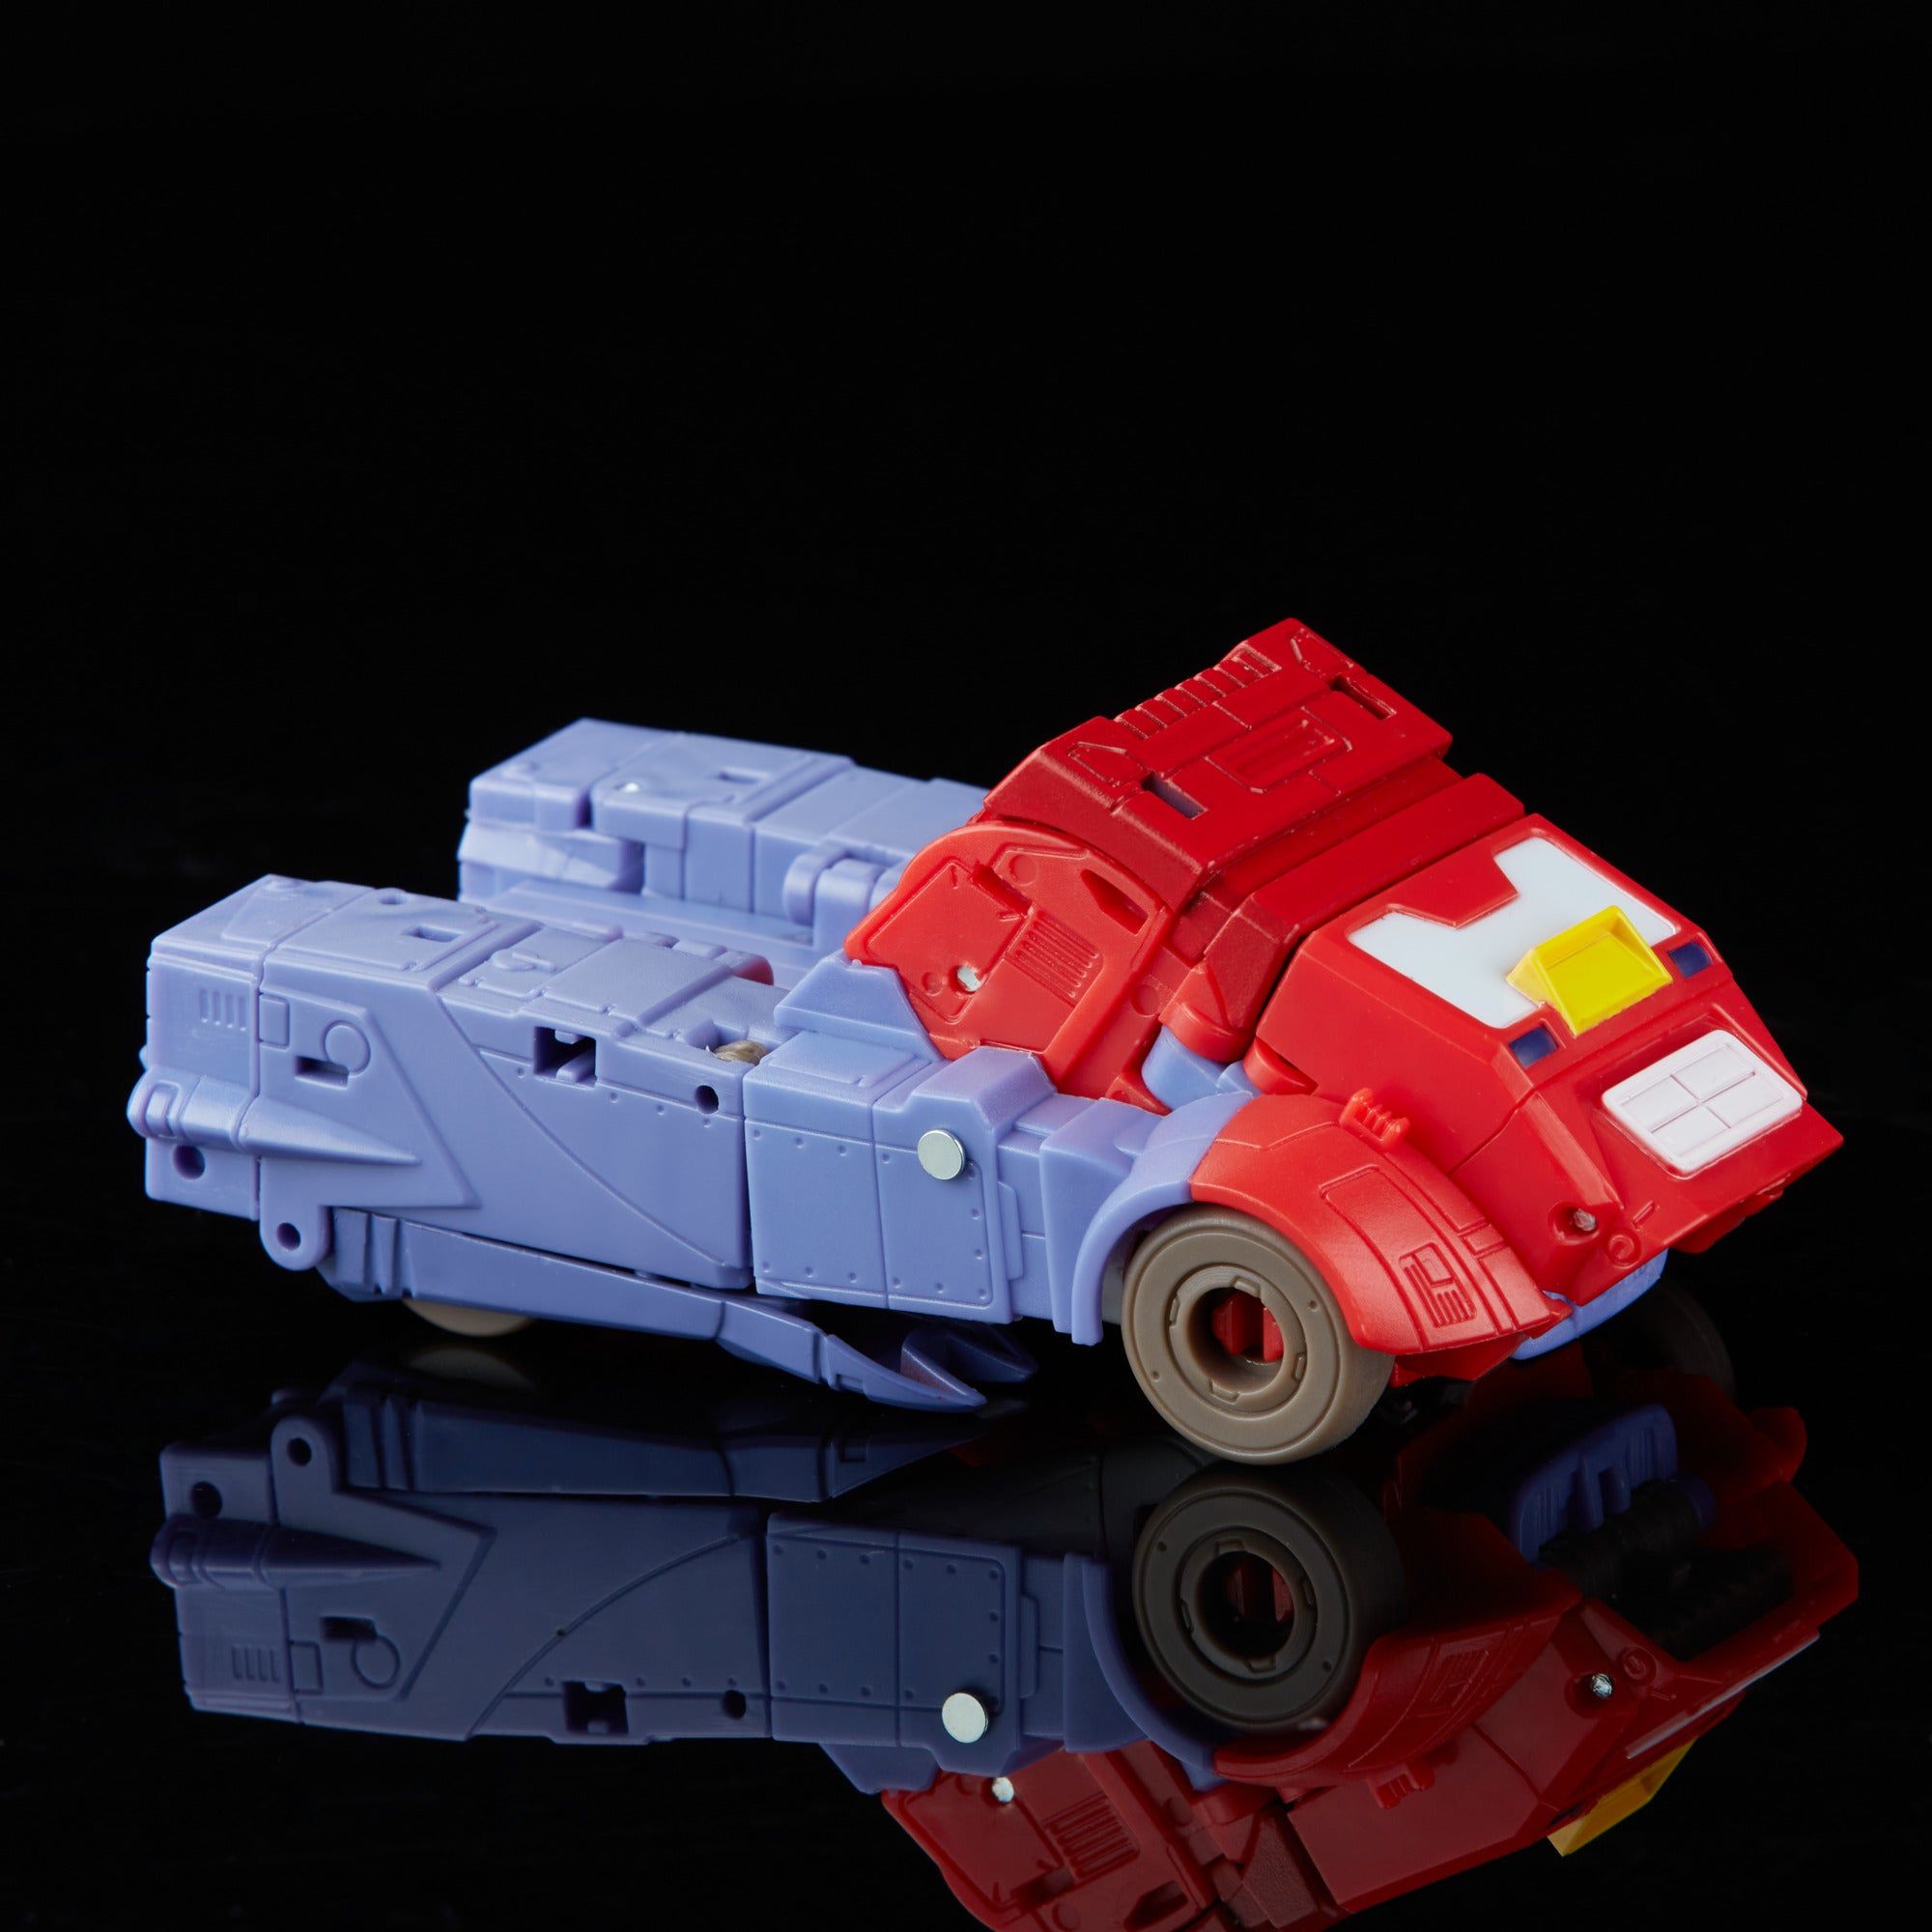 Orion Pax vehicle form toy from Hasbro